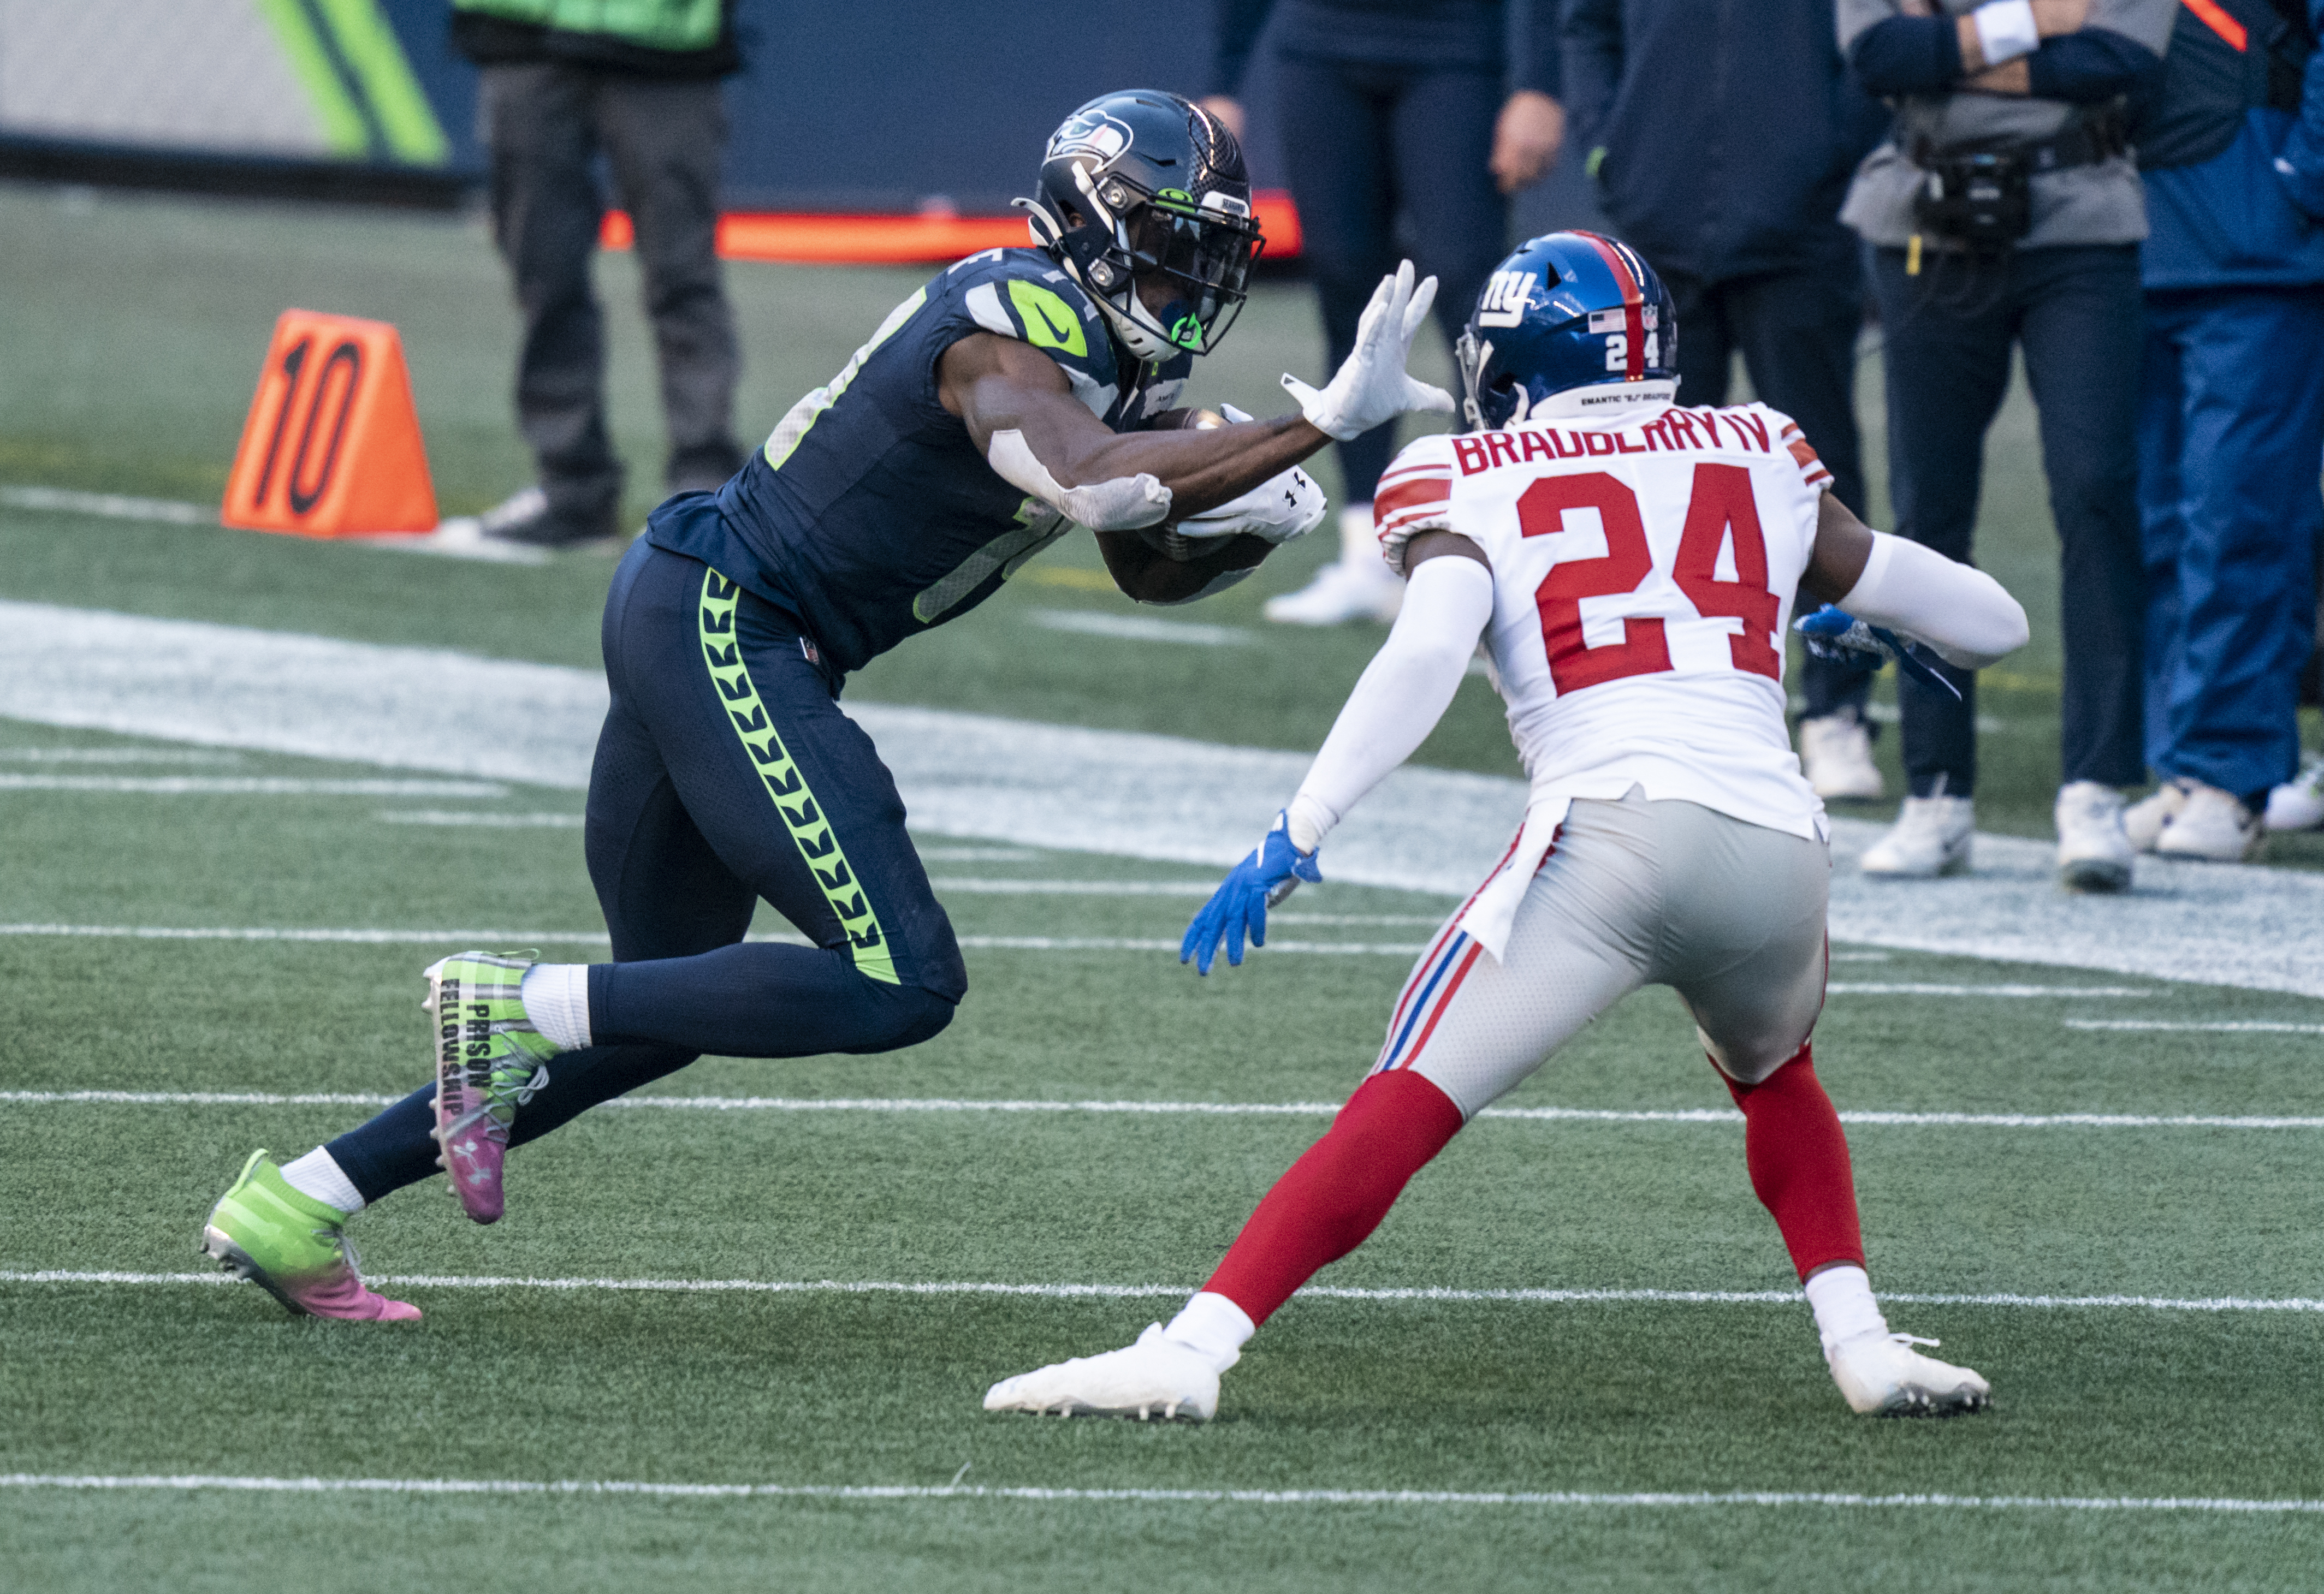 Video: Seahawks receiver DK Metcalf gets struck out by Quavo in